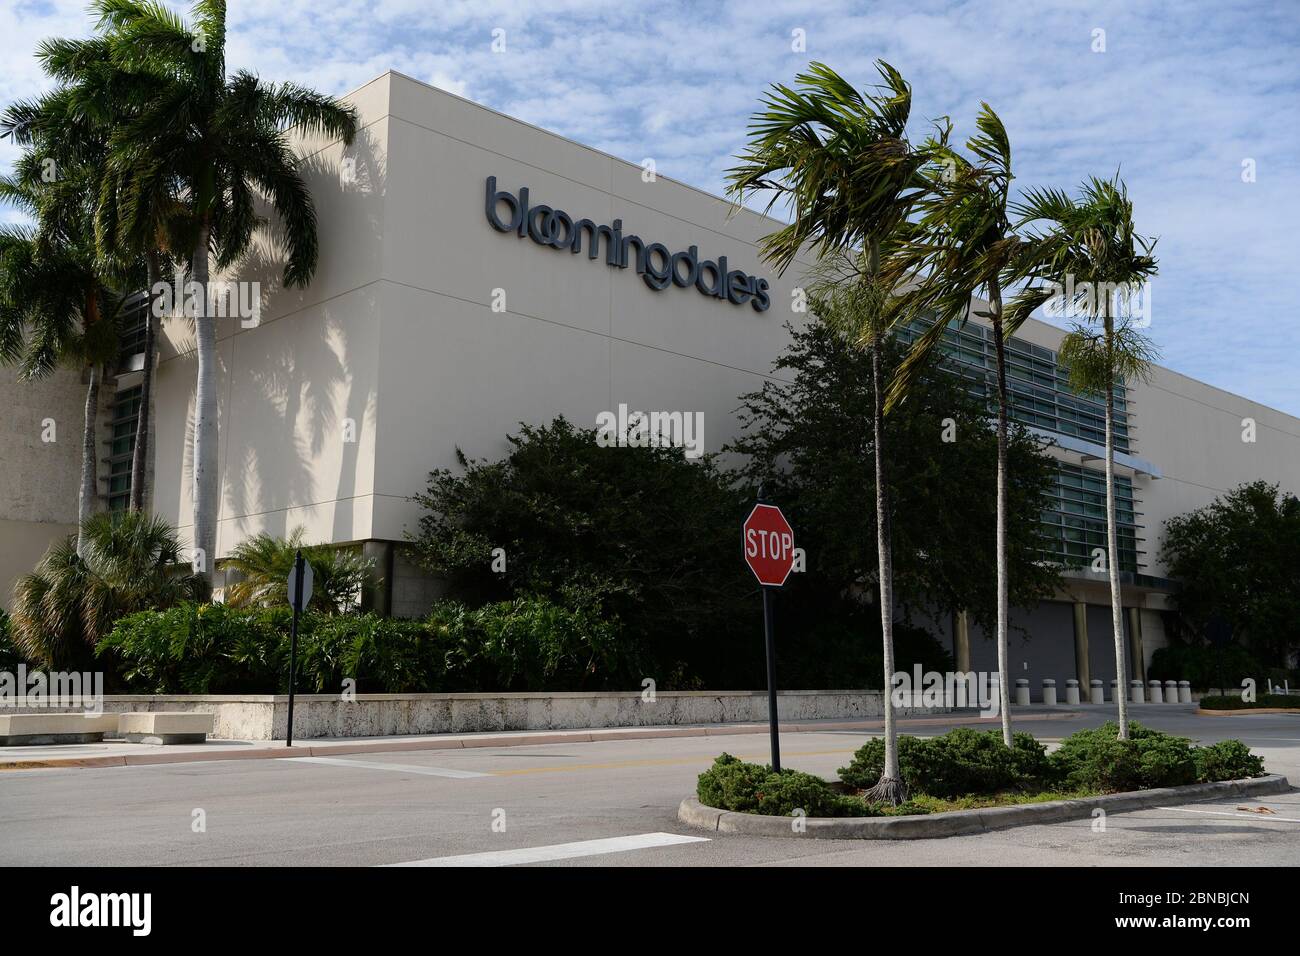 BOCA RATON, FL - MAY 13: A general view of the Boca Raton Town Center Mall  as restaurants re-open in accordance with Palm Beach County's Phase 1  reopening of businesses during the